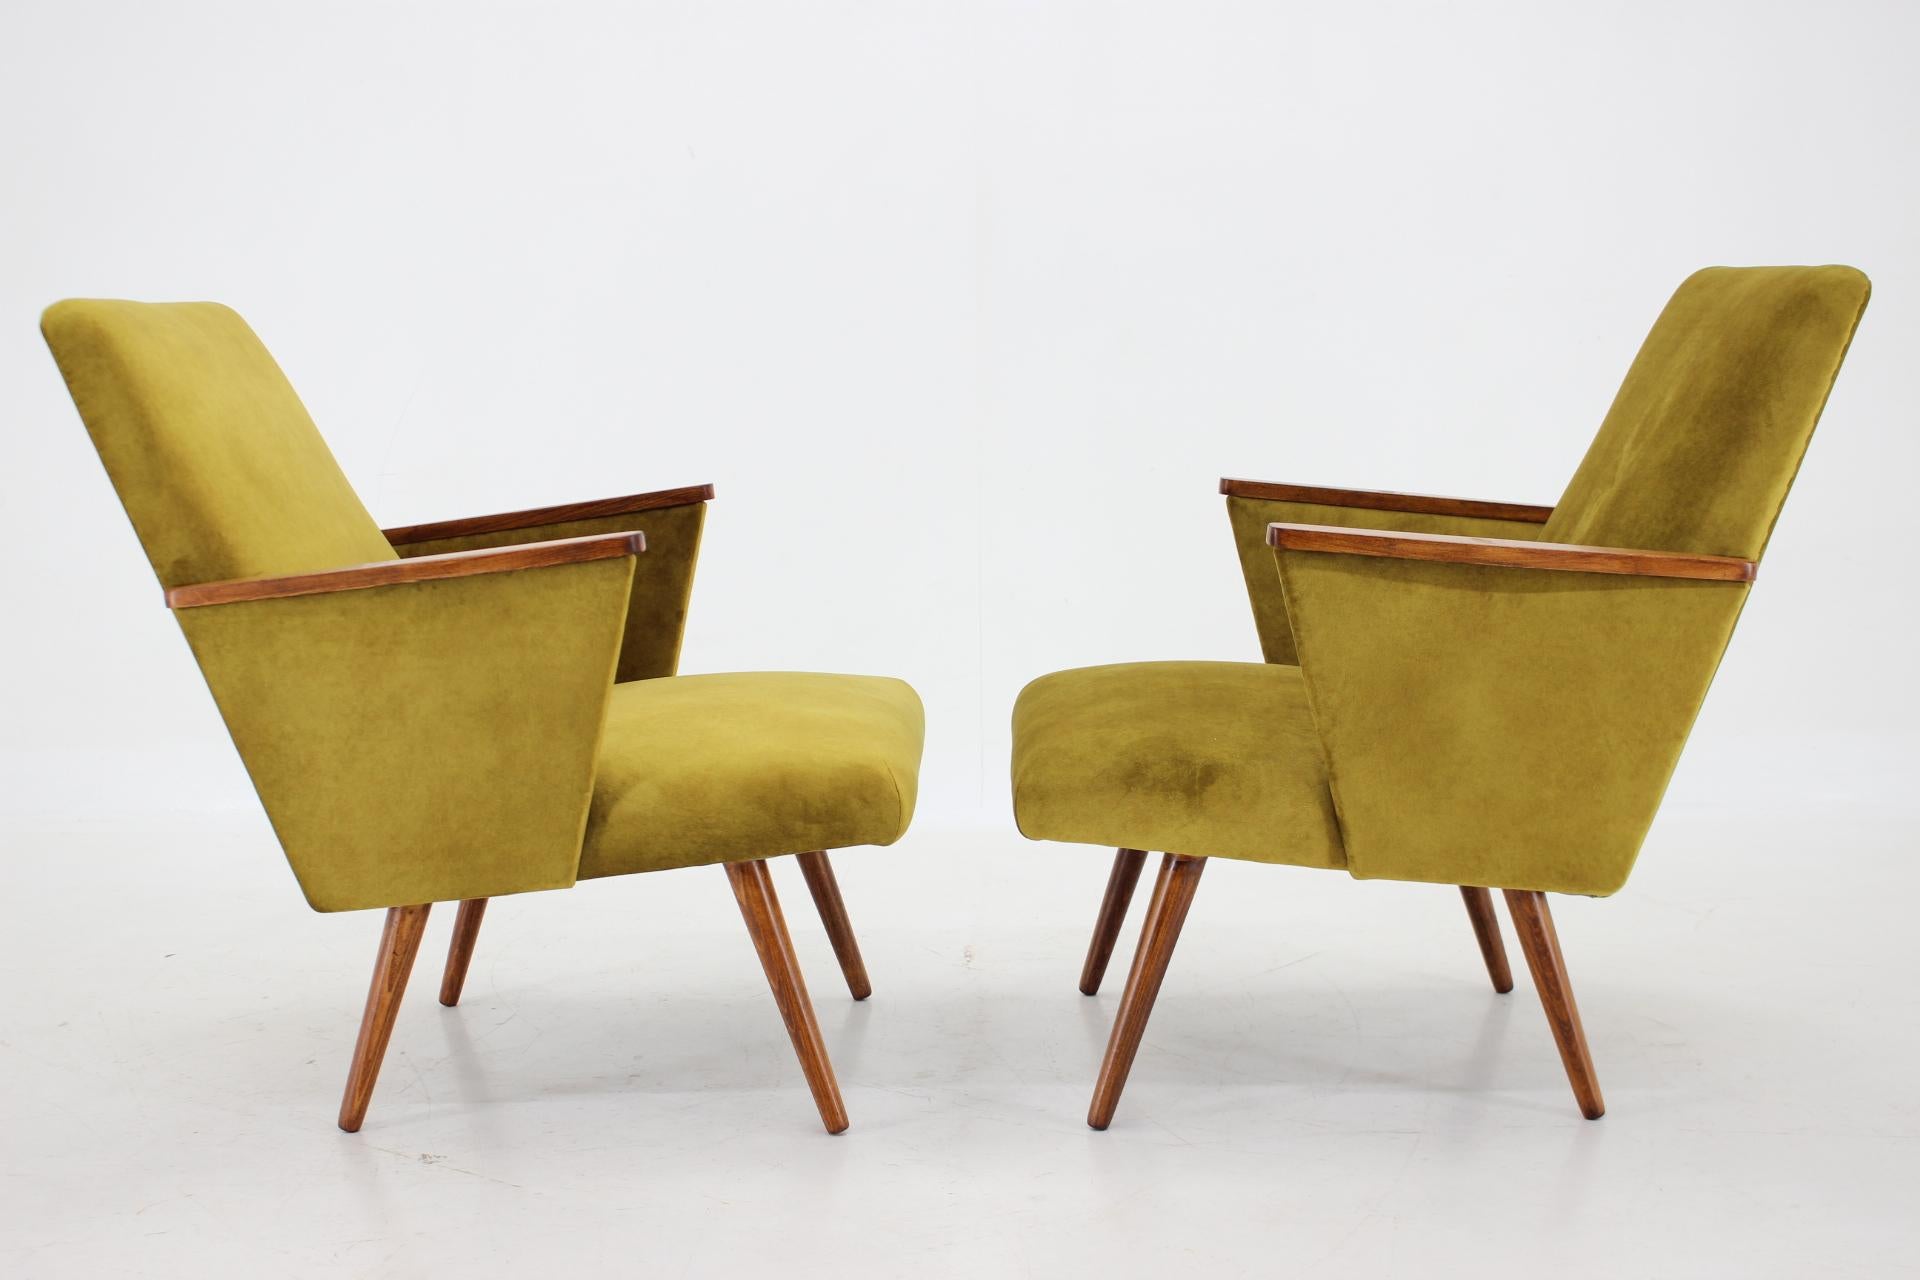 - newly upholstered in mustard color fabric 
- beech wooden parts have been refurbished.